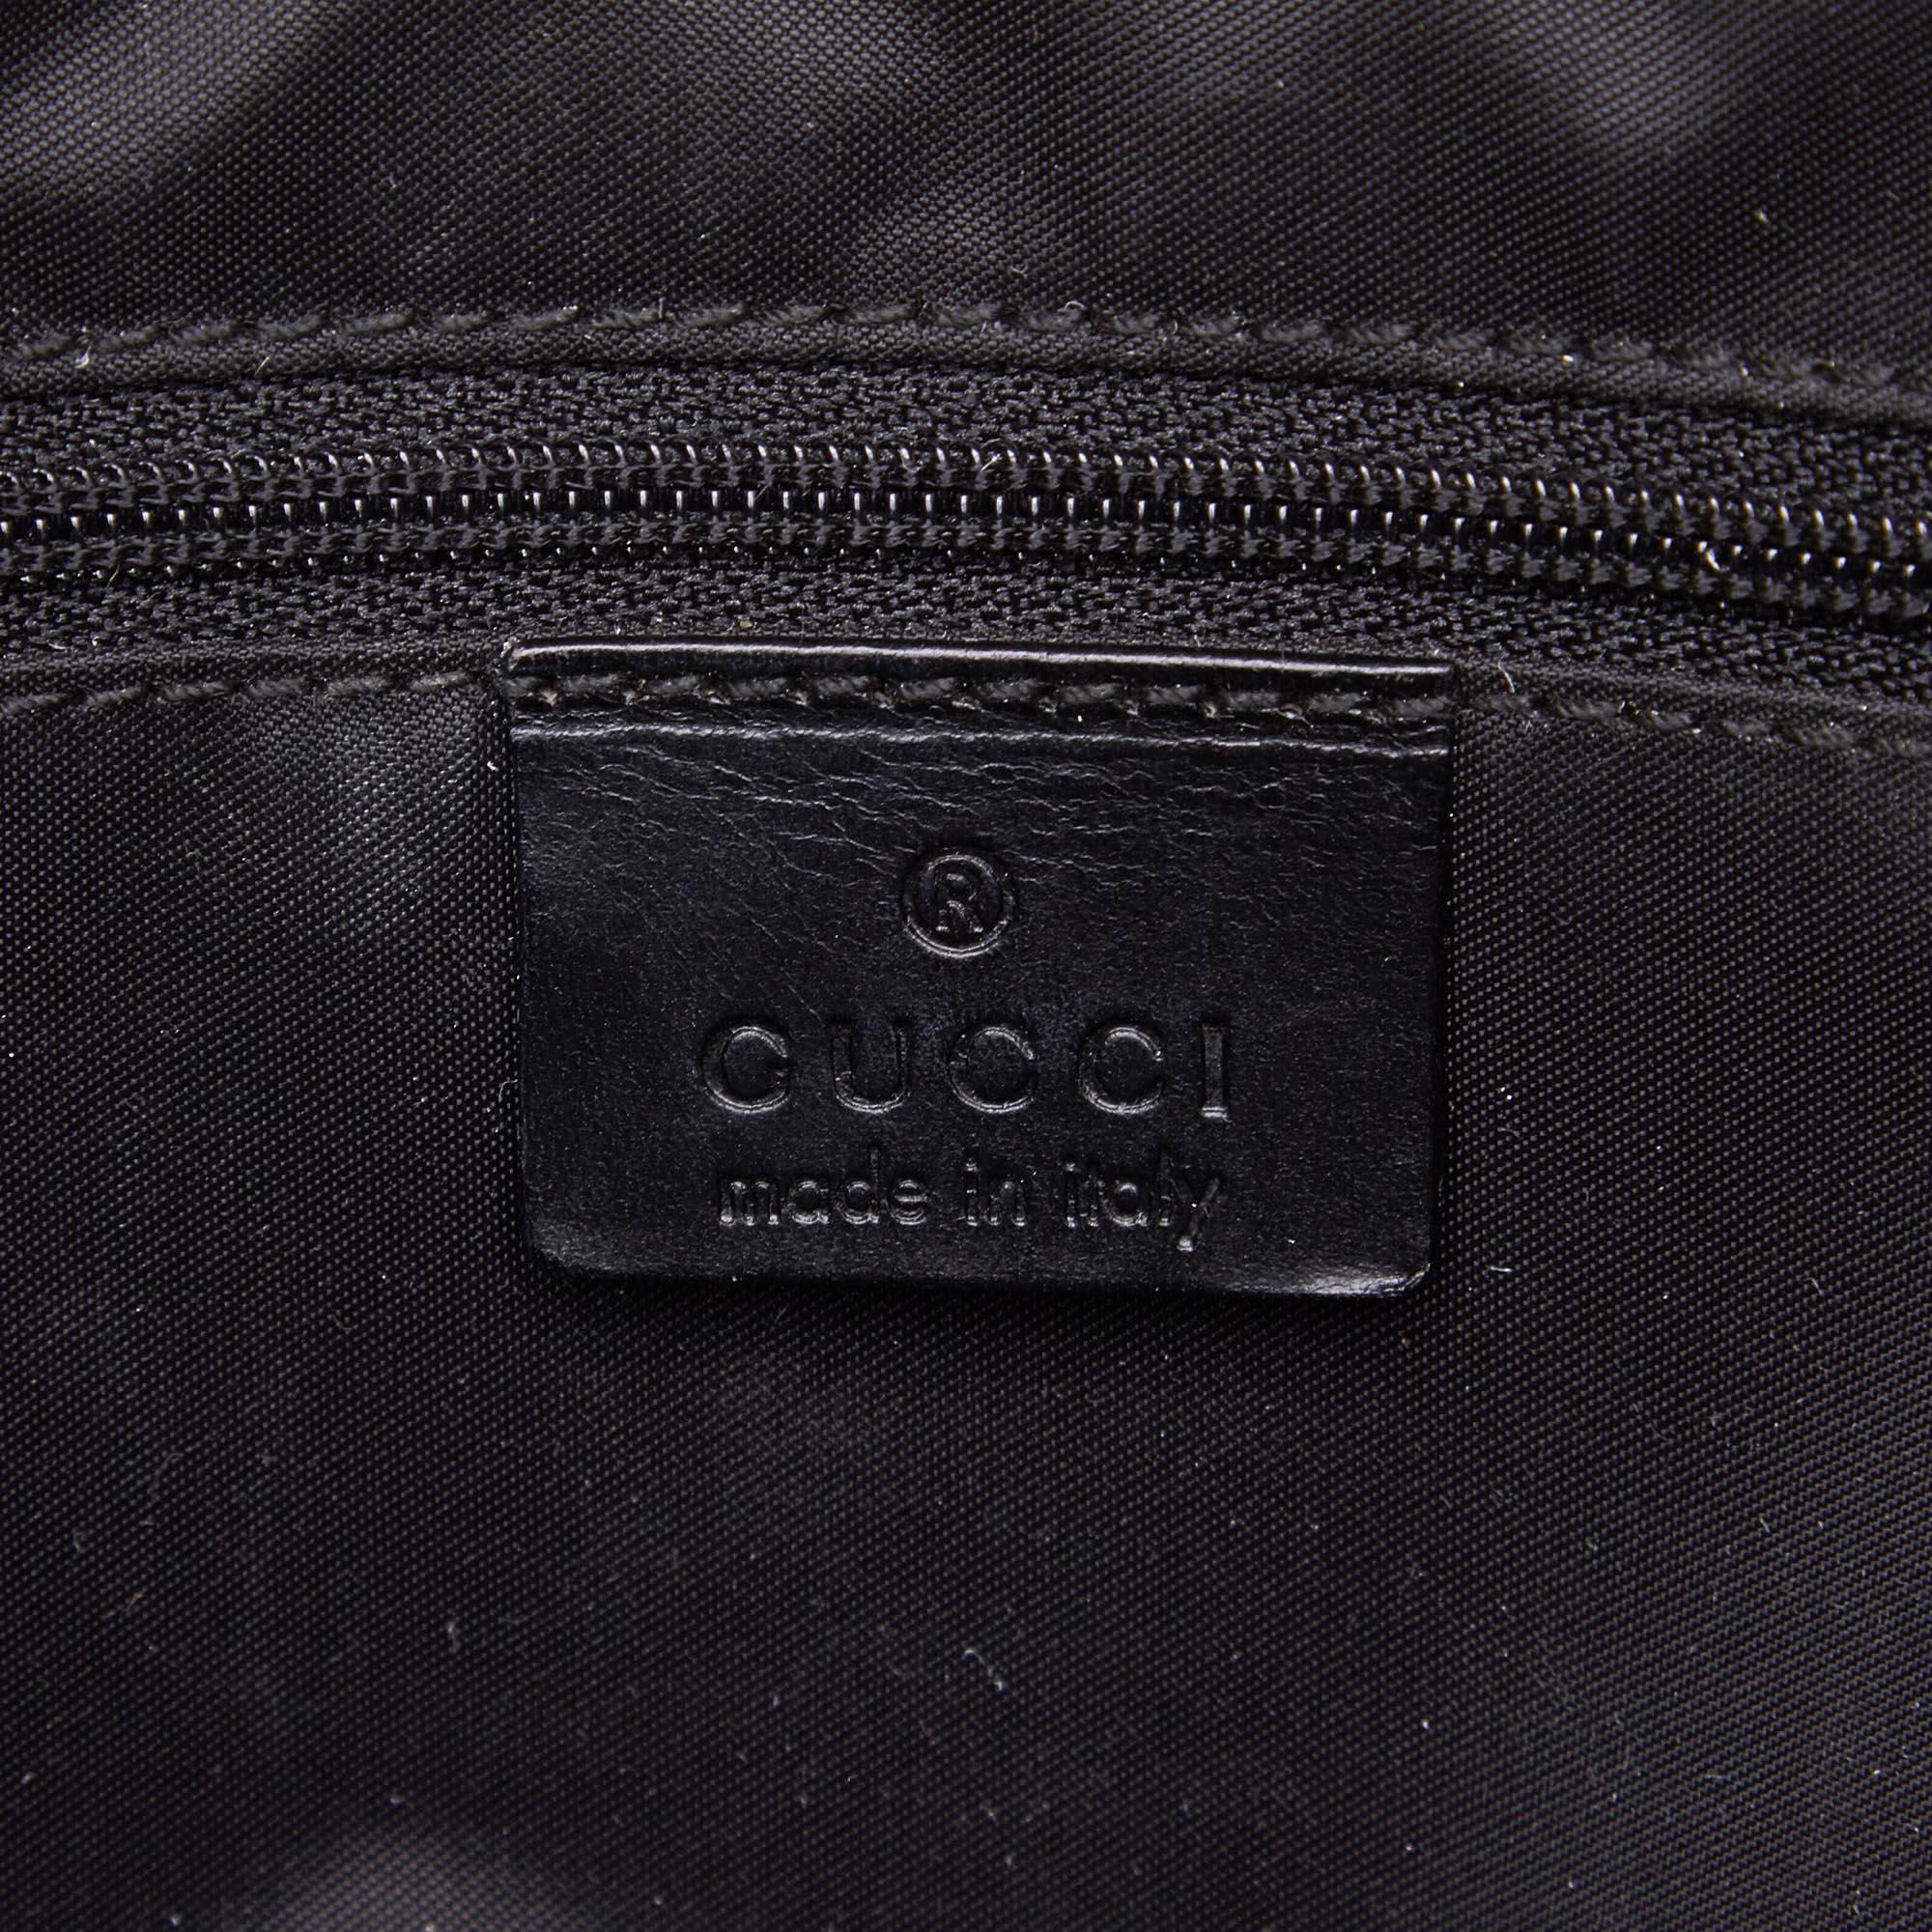 Vintage Authentic Gucci Black Canvas Fabric Bamboo Satchel Italy MEDIUM  For Sale 3